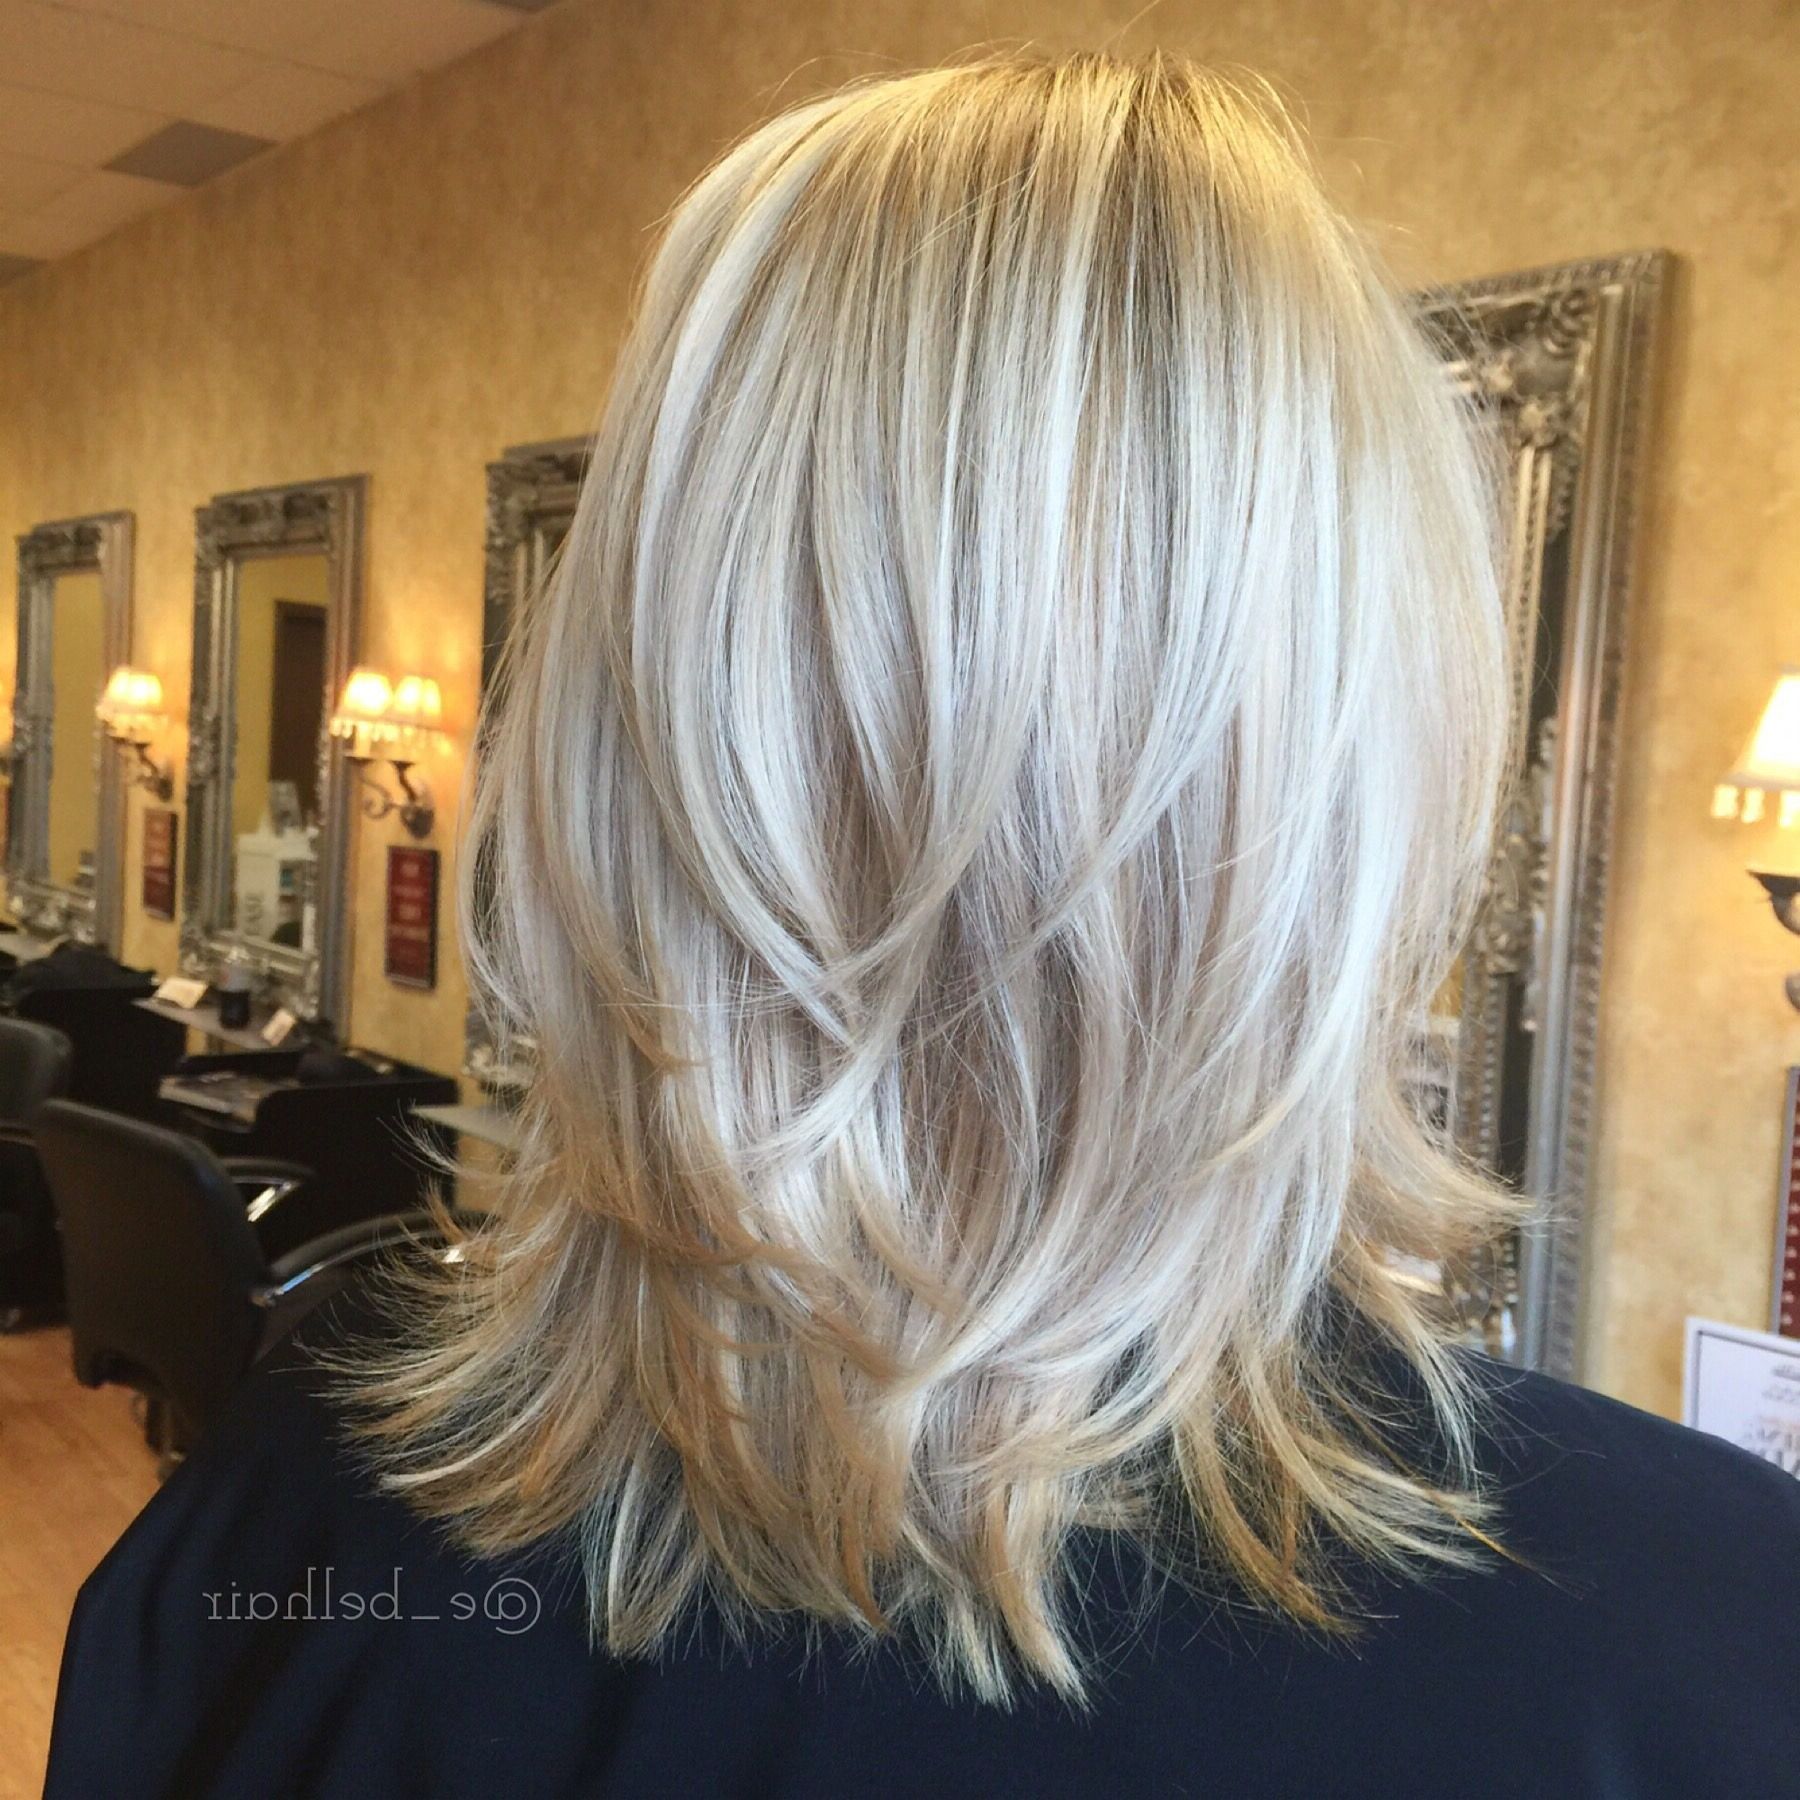 Most Recent Tousled Shoulder Length Waves Blonde Hairstyles In Shoulder Length Cut With Tousled Layers And Fresh Blonde Color (View 1 of 20)